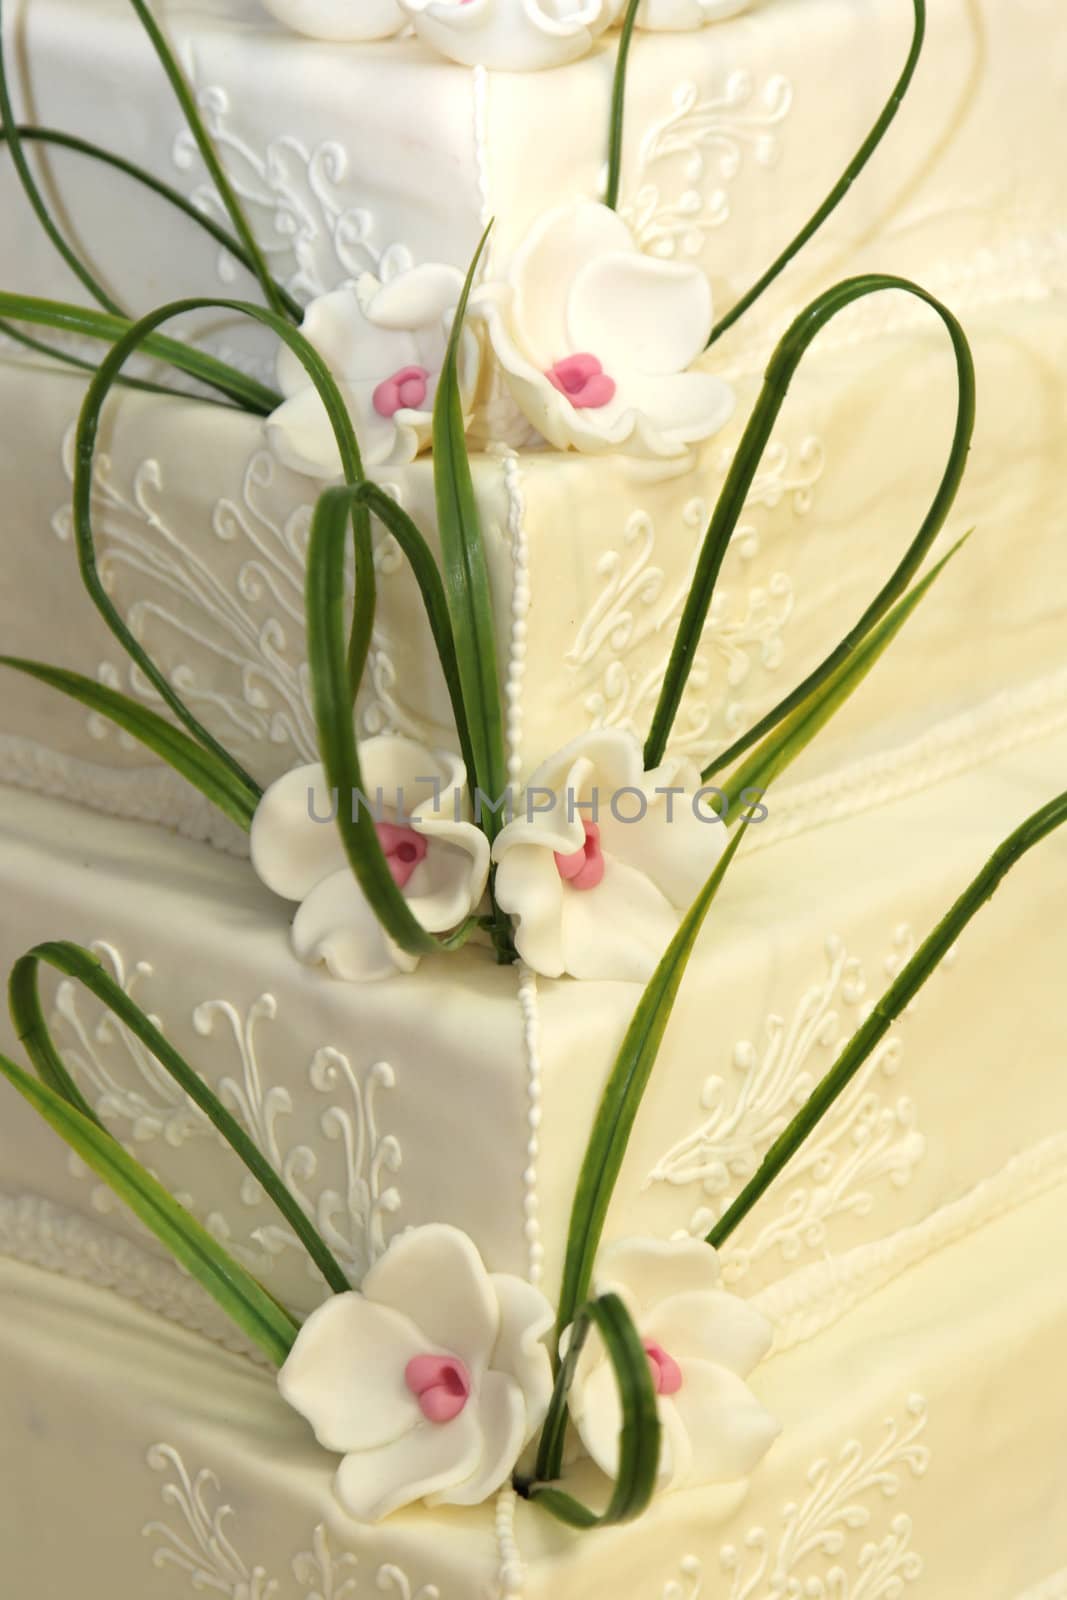 -Wedding cake or birthday cake decorated with marzipan roses by Farina6000